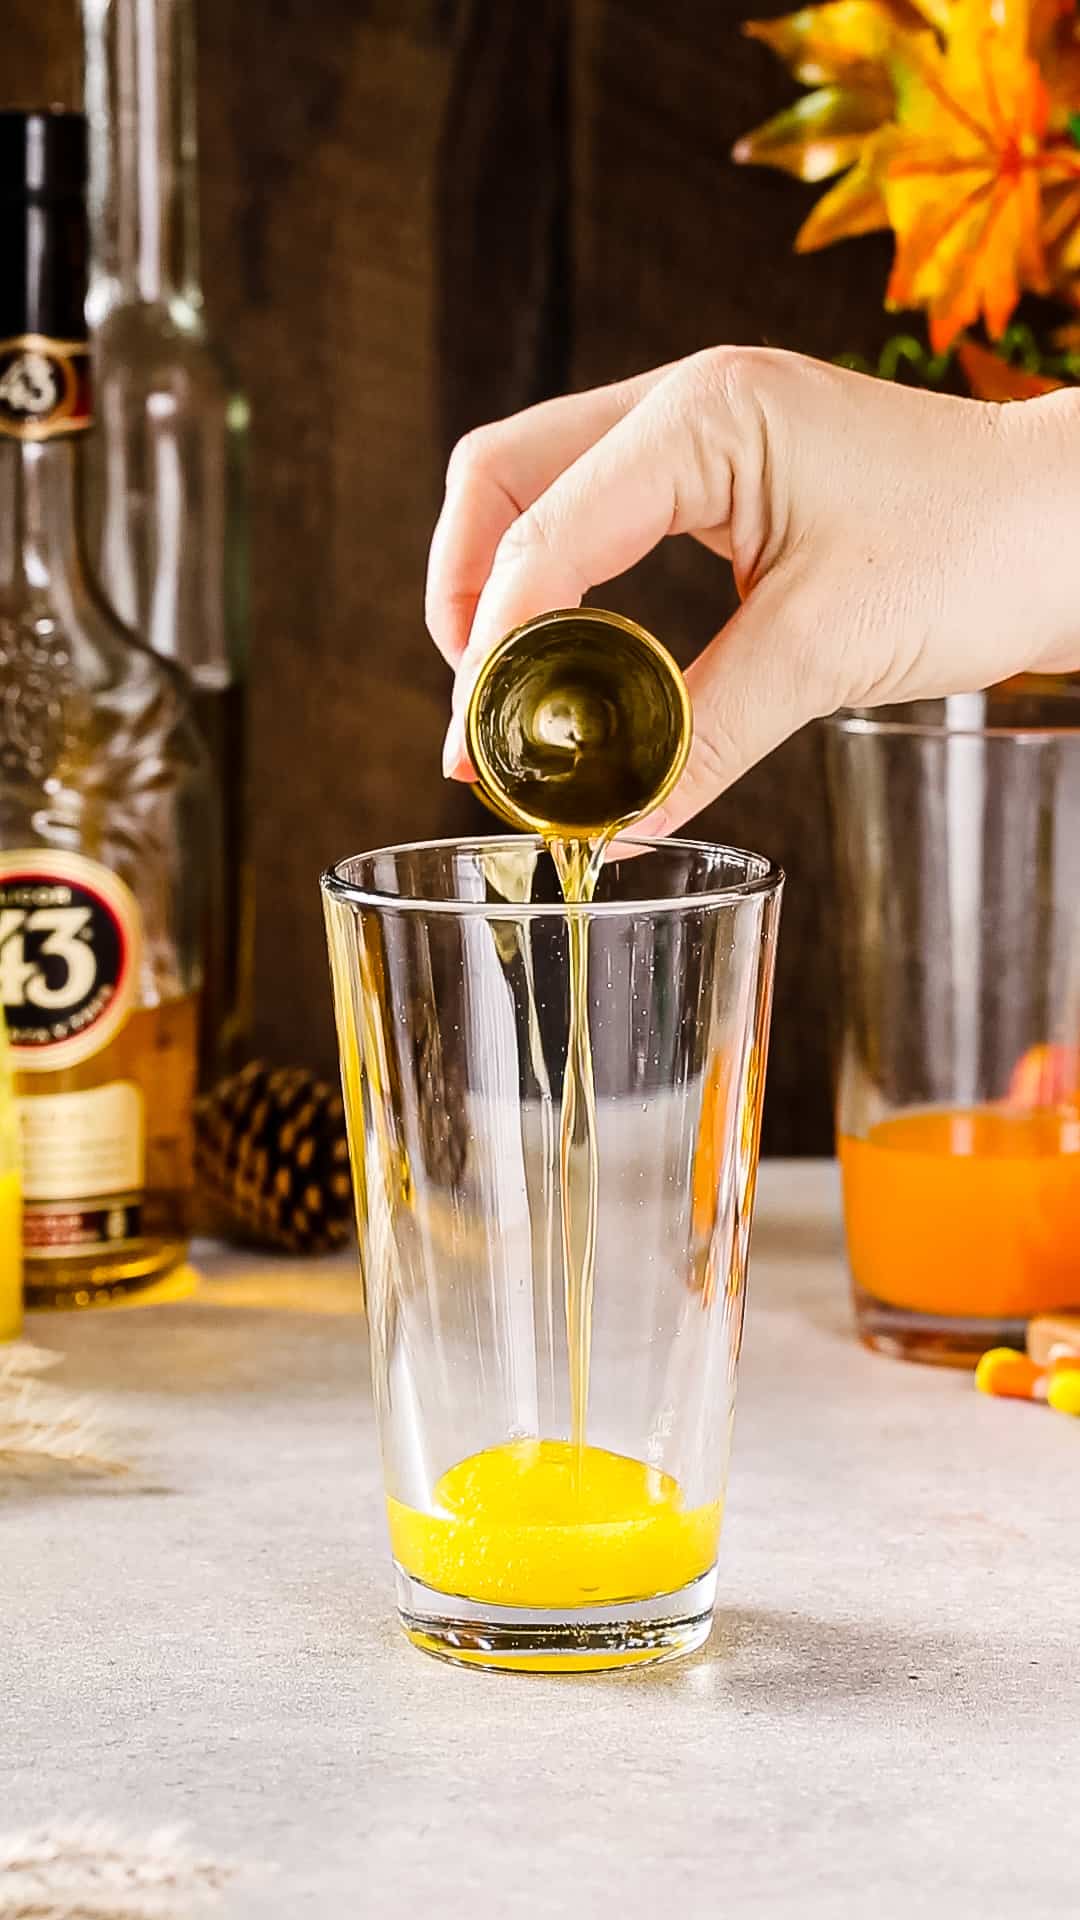 Hand pouring Licor 43 from a cocktail jigger into a cocktail shaker with yellow liquid in it.